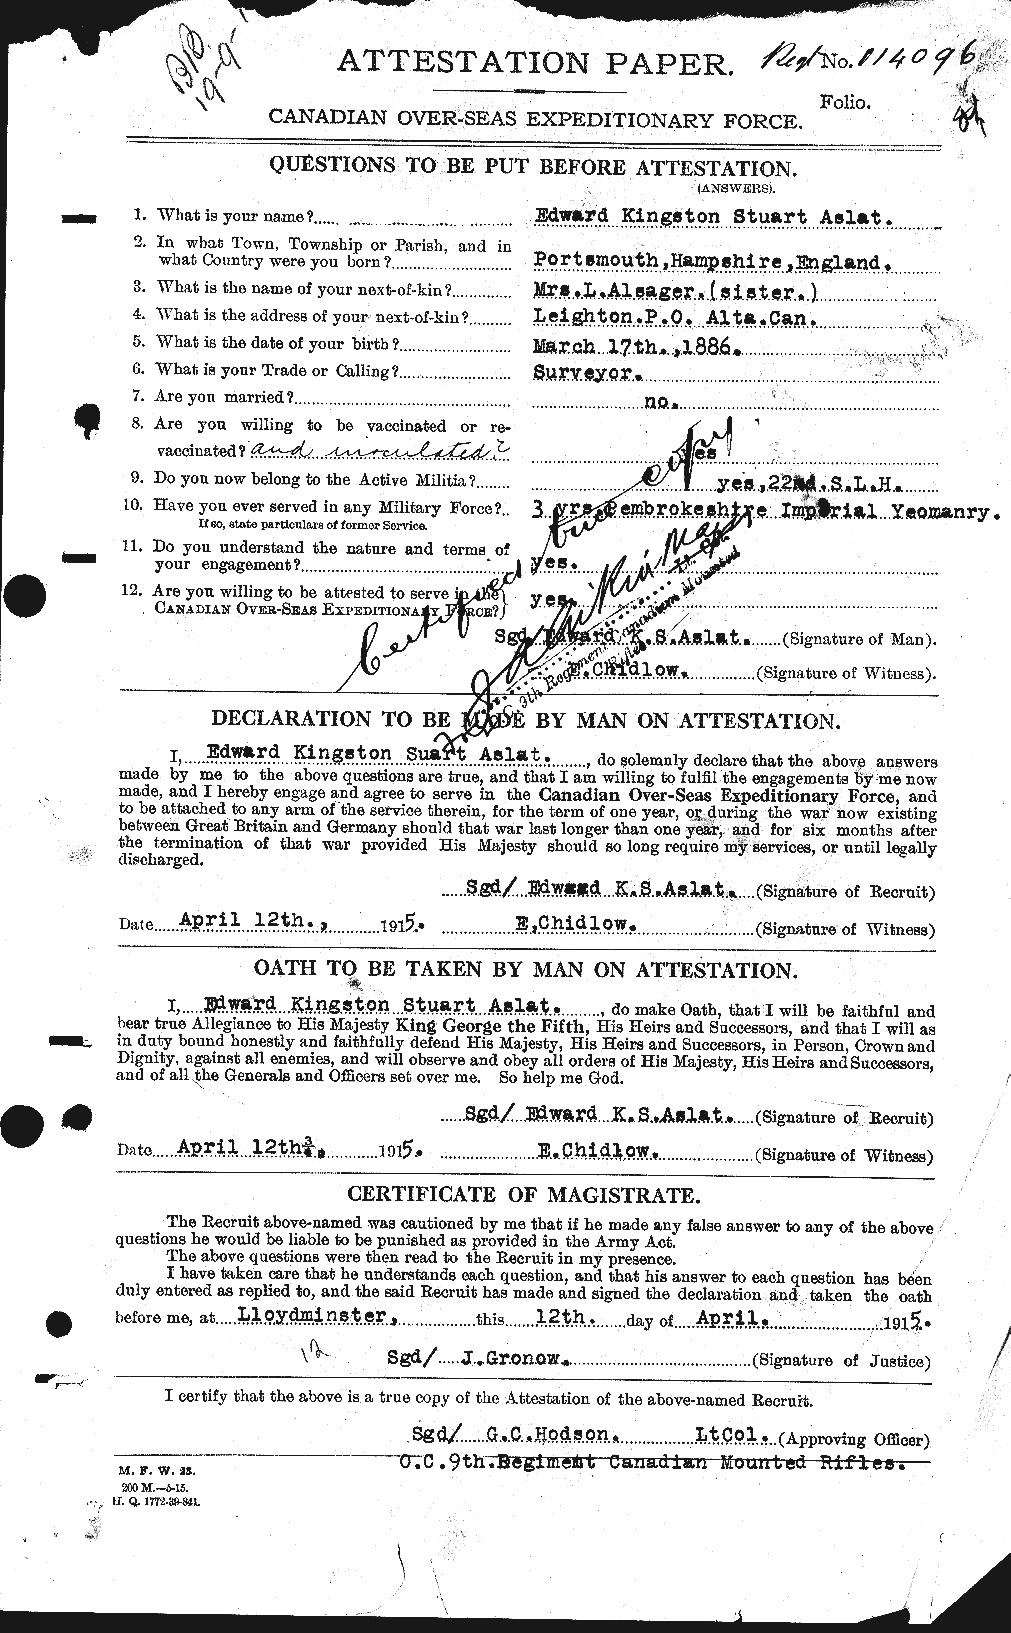 Personnel Records of the First World War - CEF 223628a